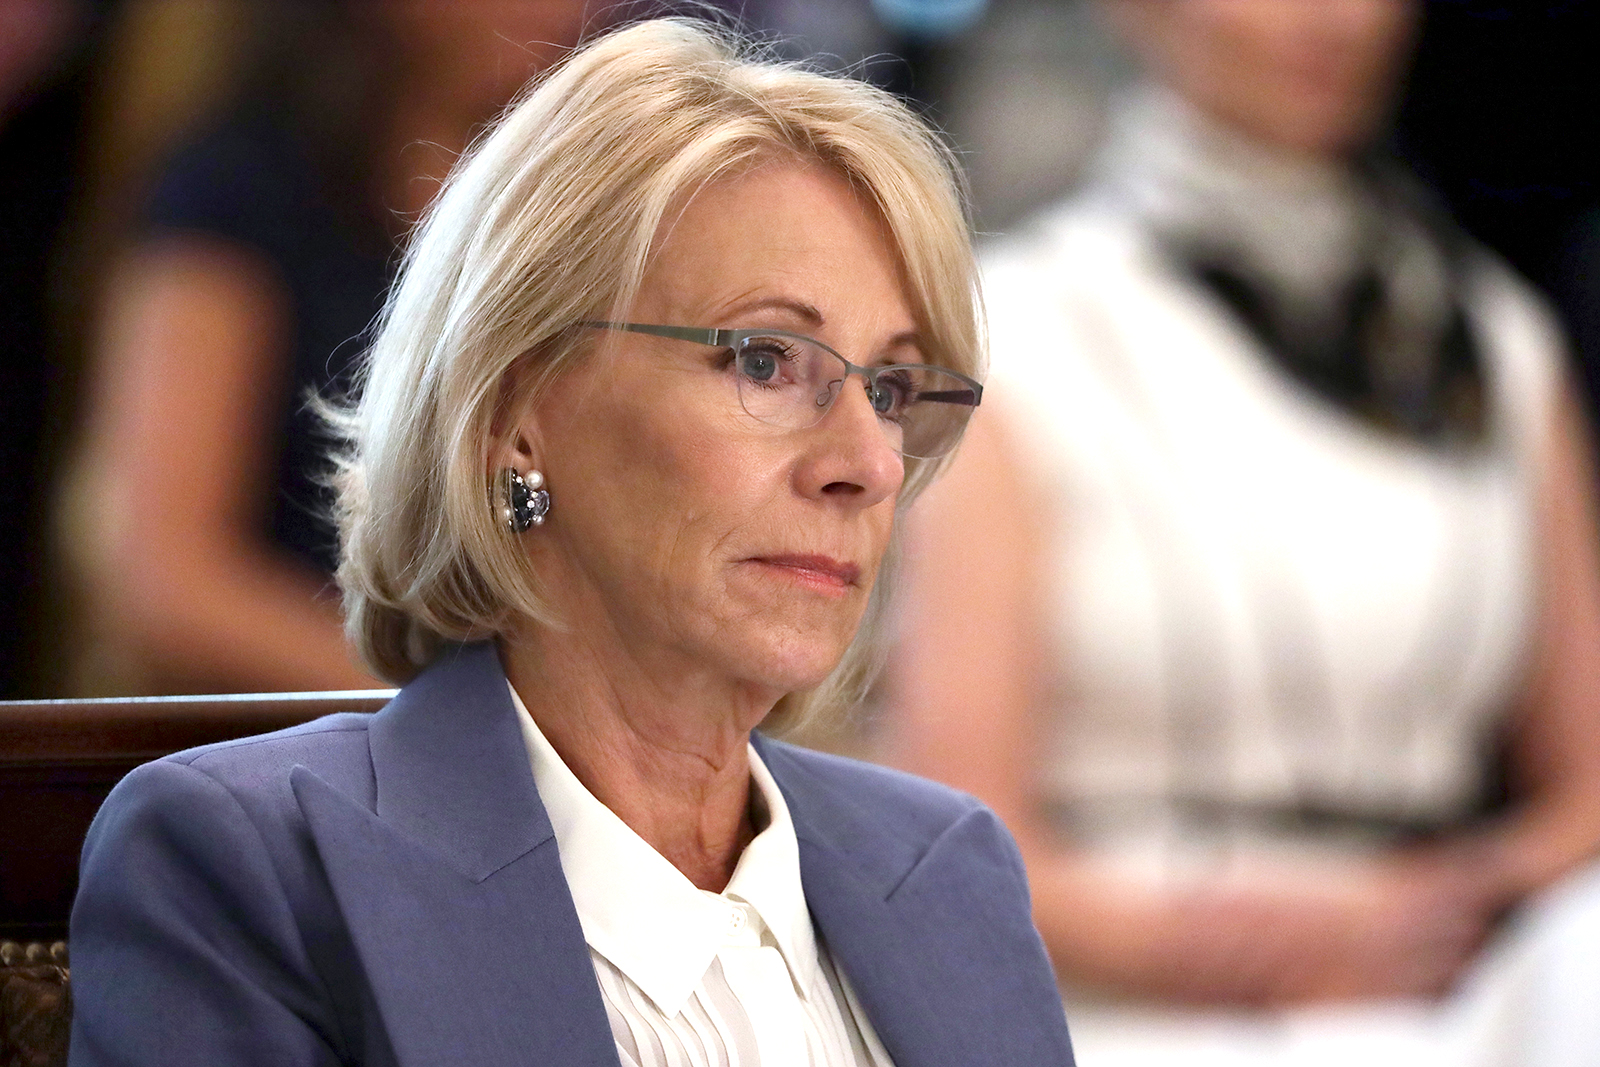 US Secretary of Education Betsy DeVos listens during a cabinet meeting at the White House in Washington, DC on May 19. 